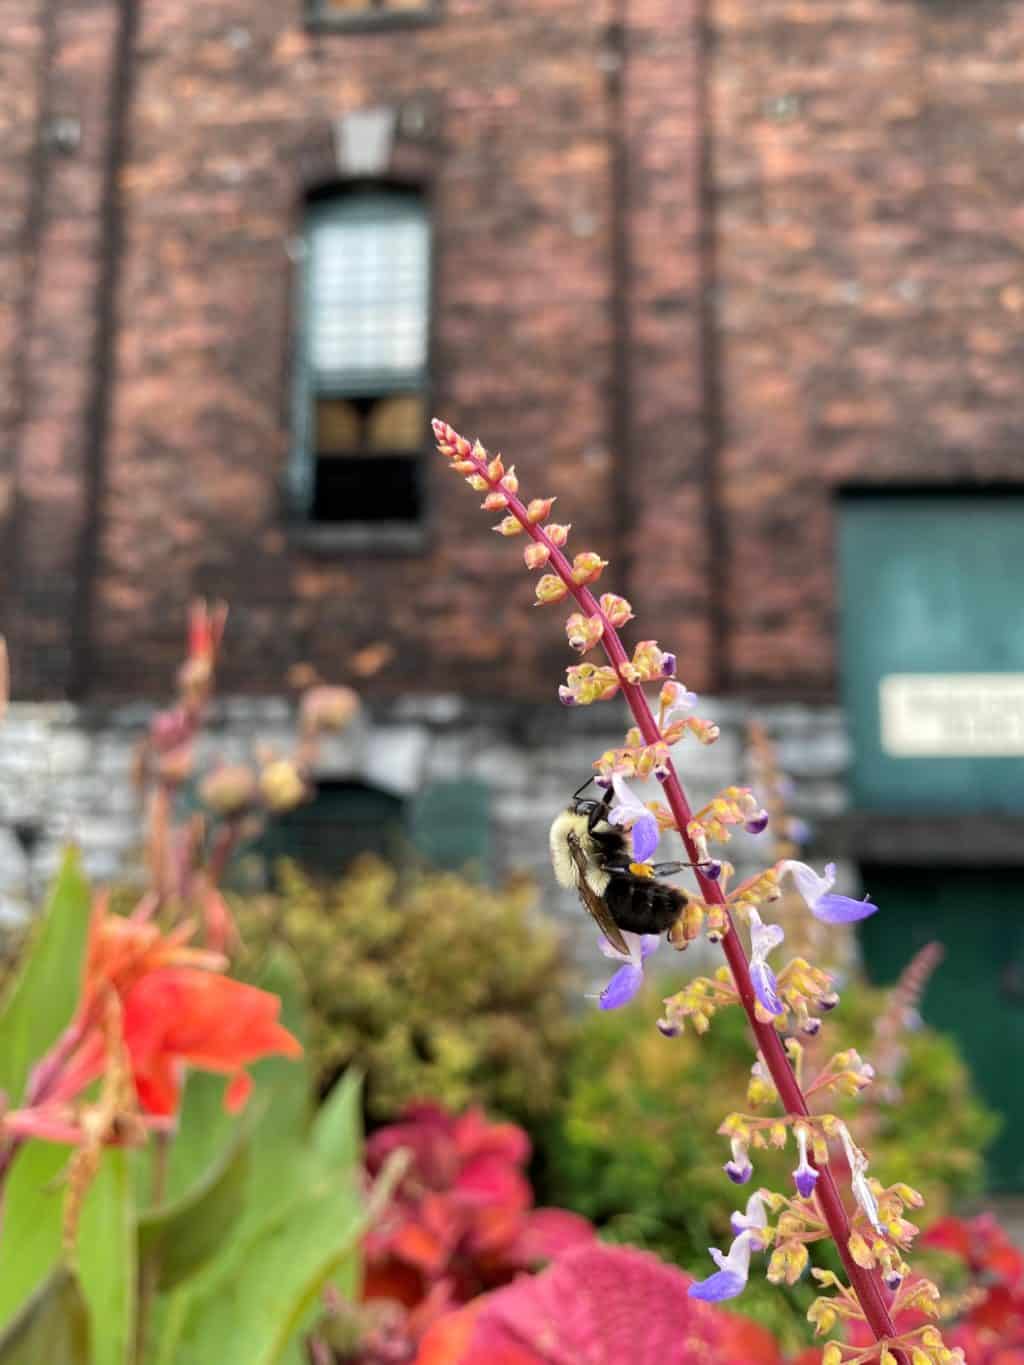 Bee on flower in front of warehouse